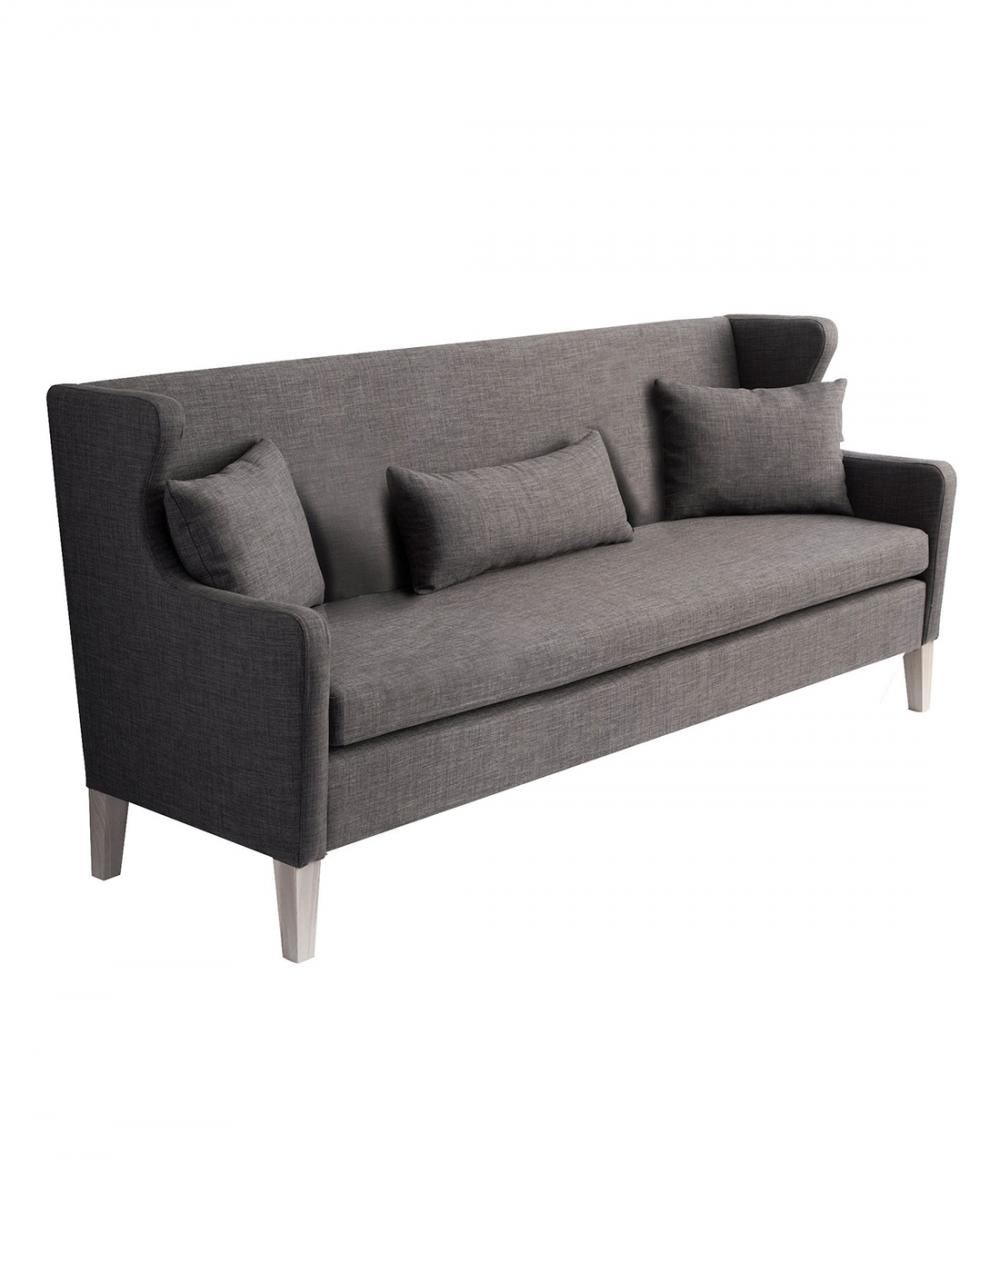 Kveld Dining Sofa 225 Leather Group 6 Oak Natural Oiled